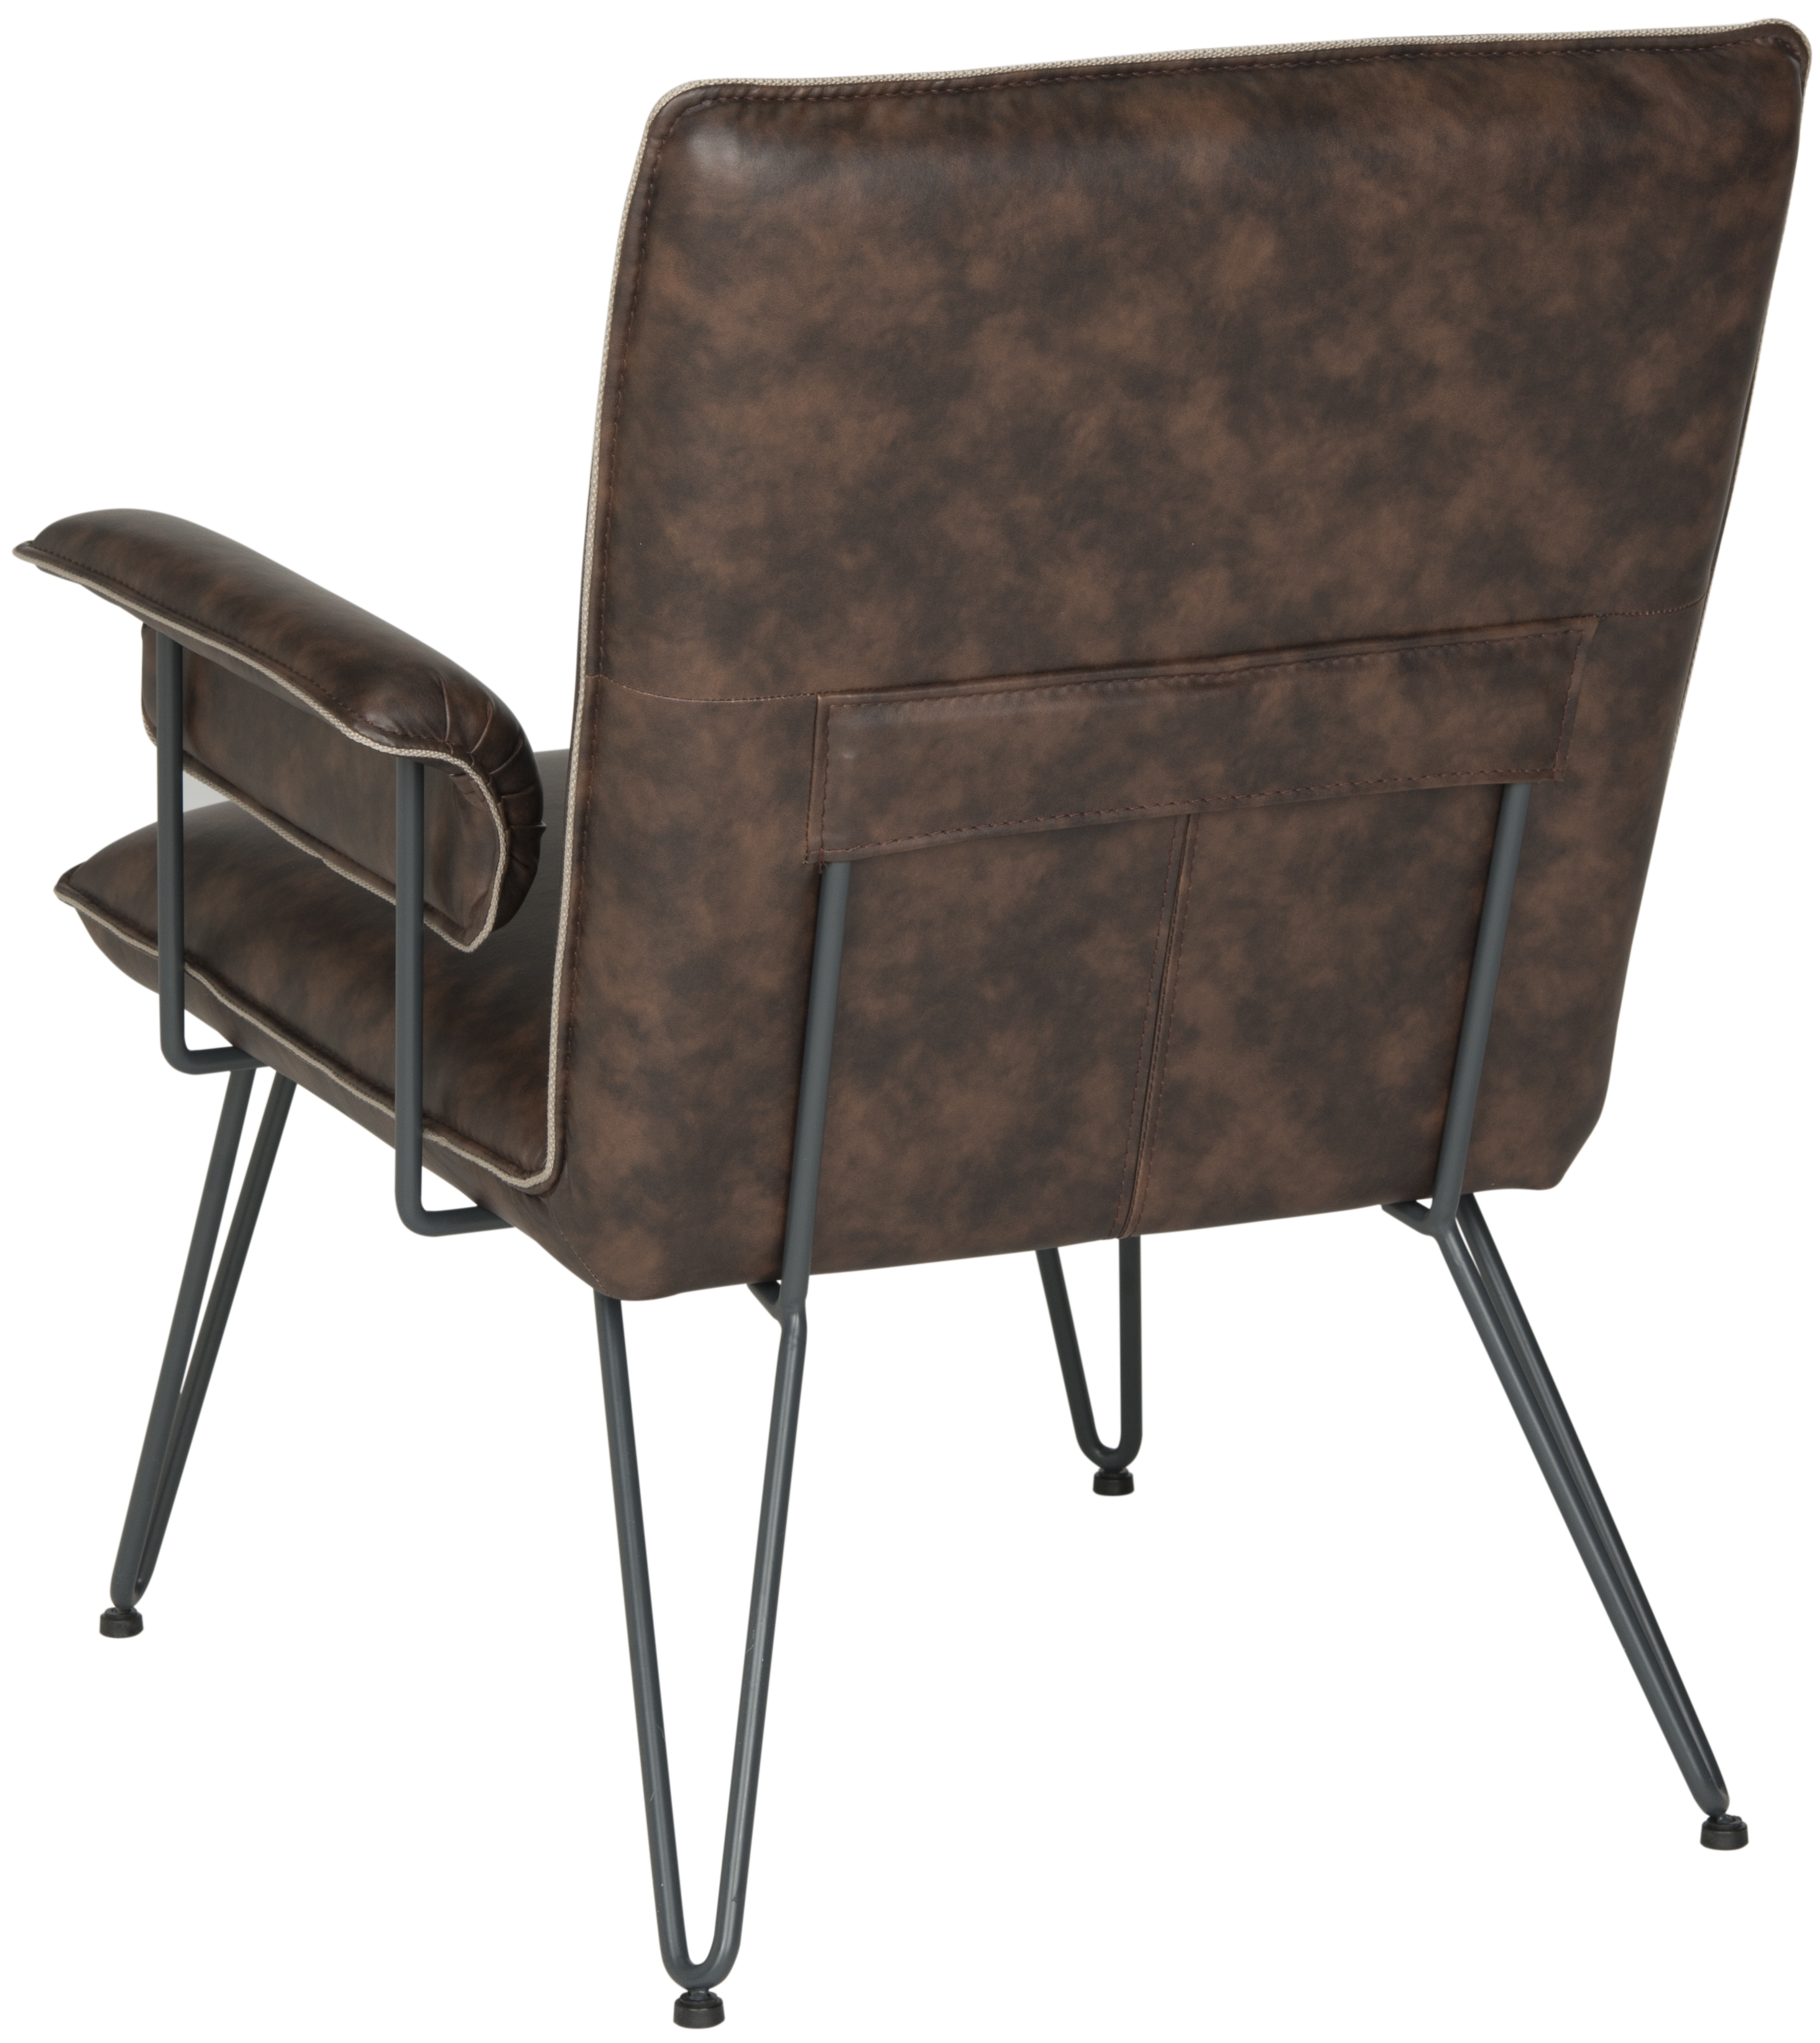 Johannes 17.3"H Mid Century Modern Leather Arm Chair - Antique Brown/Black - Arlo Home - Image 1